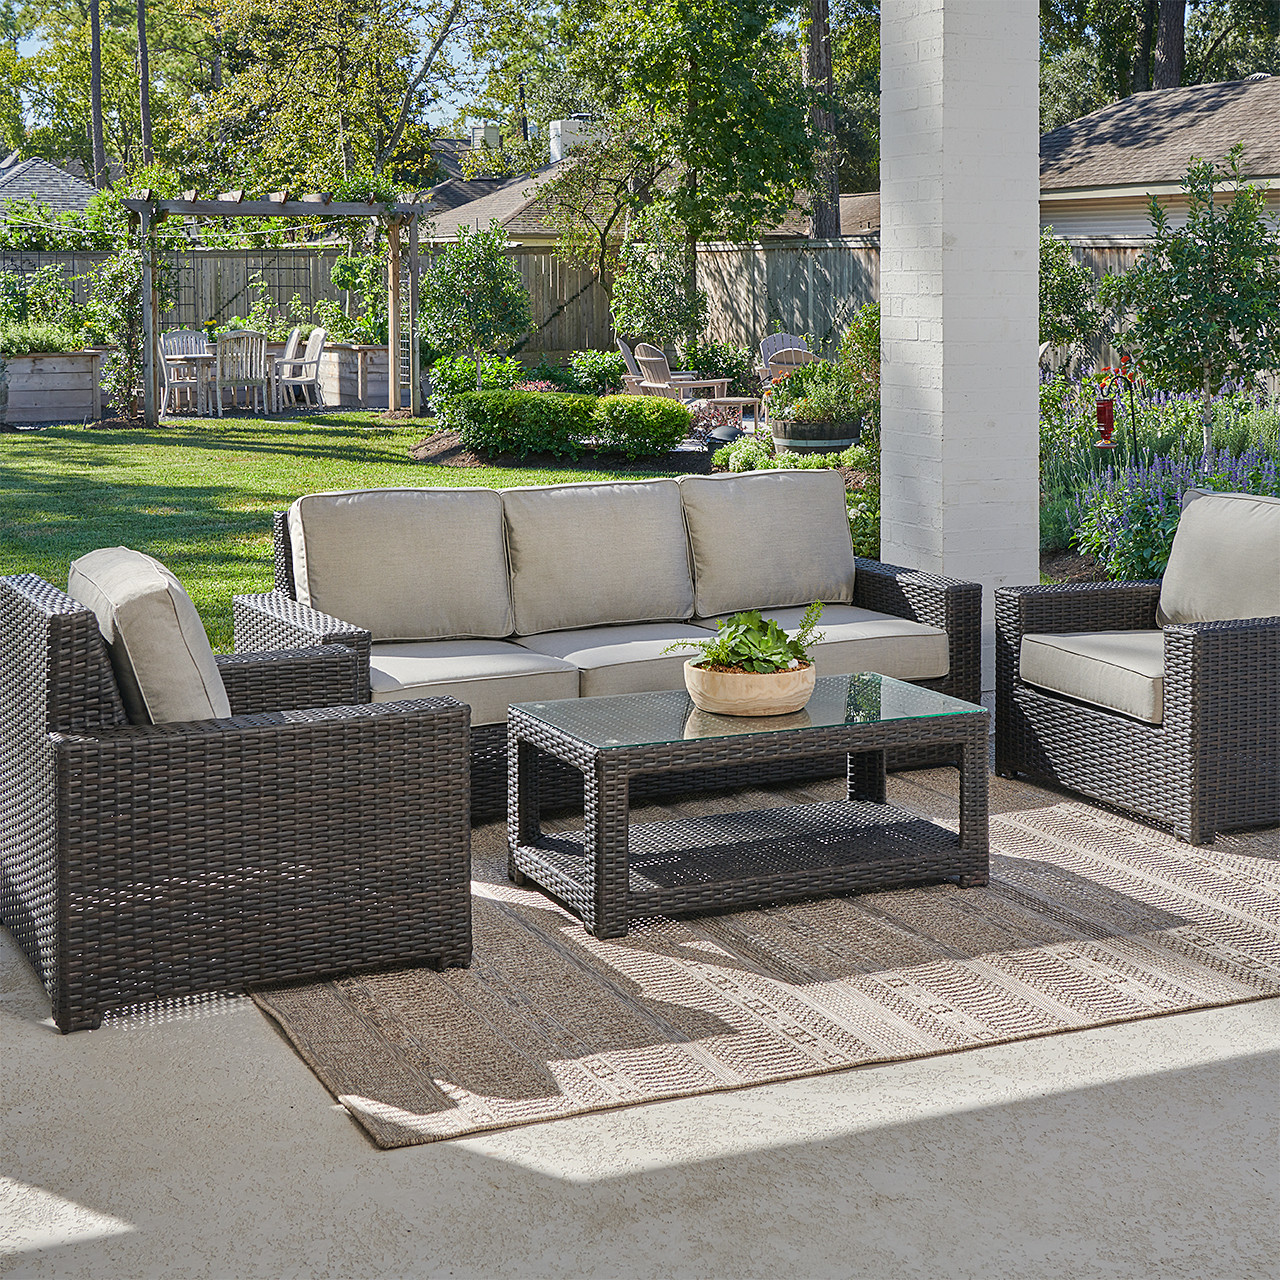 San Lucas Outdoor Wicker with Cushions 4 Piece Sofa Group + 43 x 23 in. Coffee Table